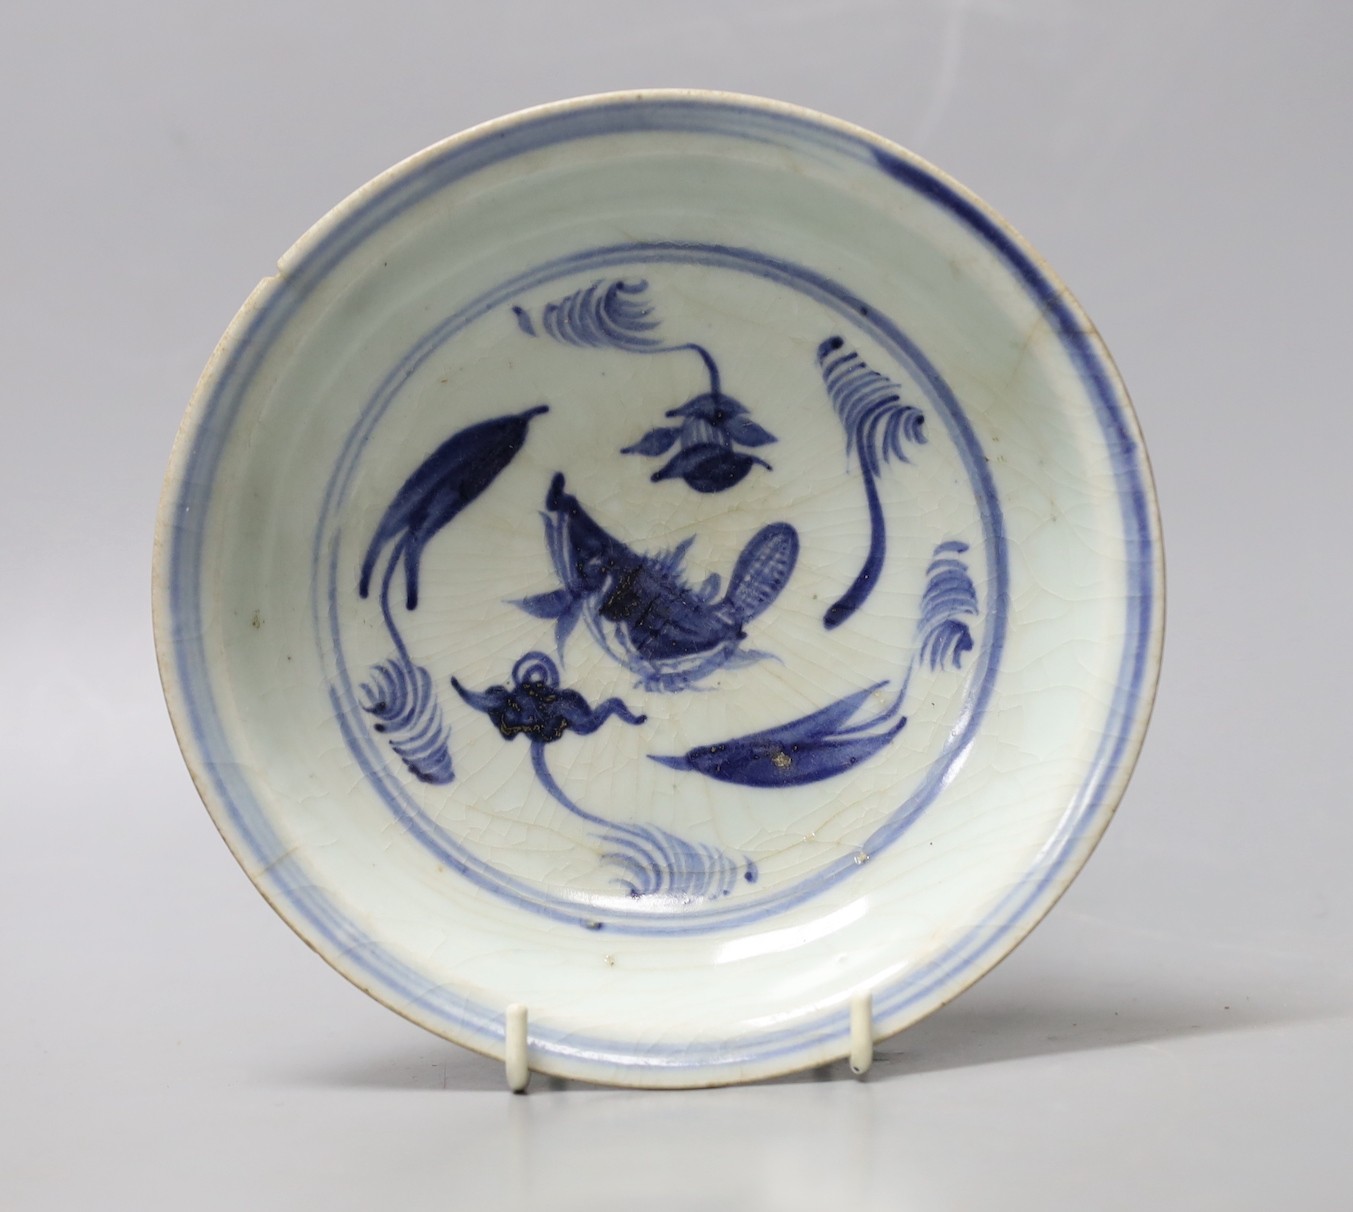 A Chinese late Ming blue and white saucer dish, 16th century, 17cm diameter